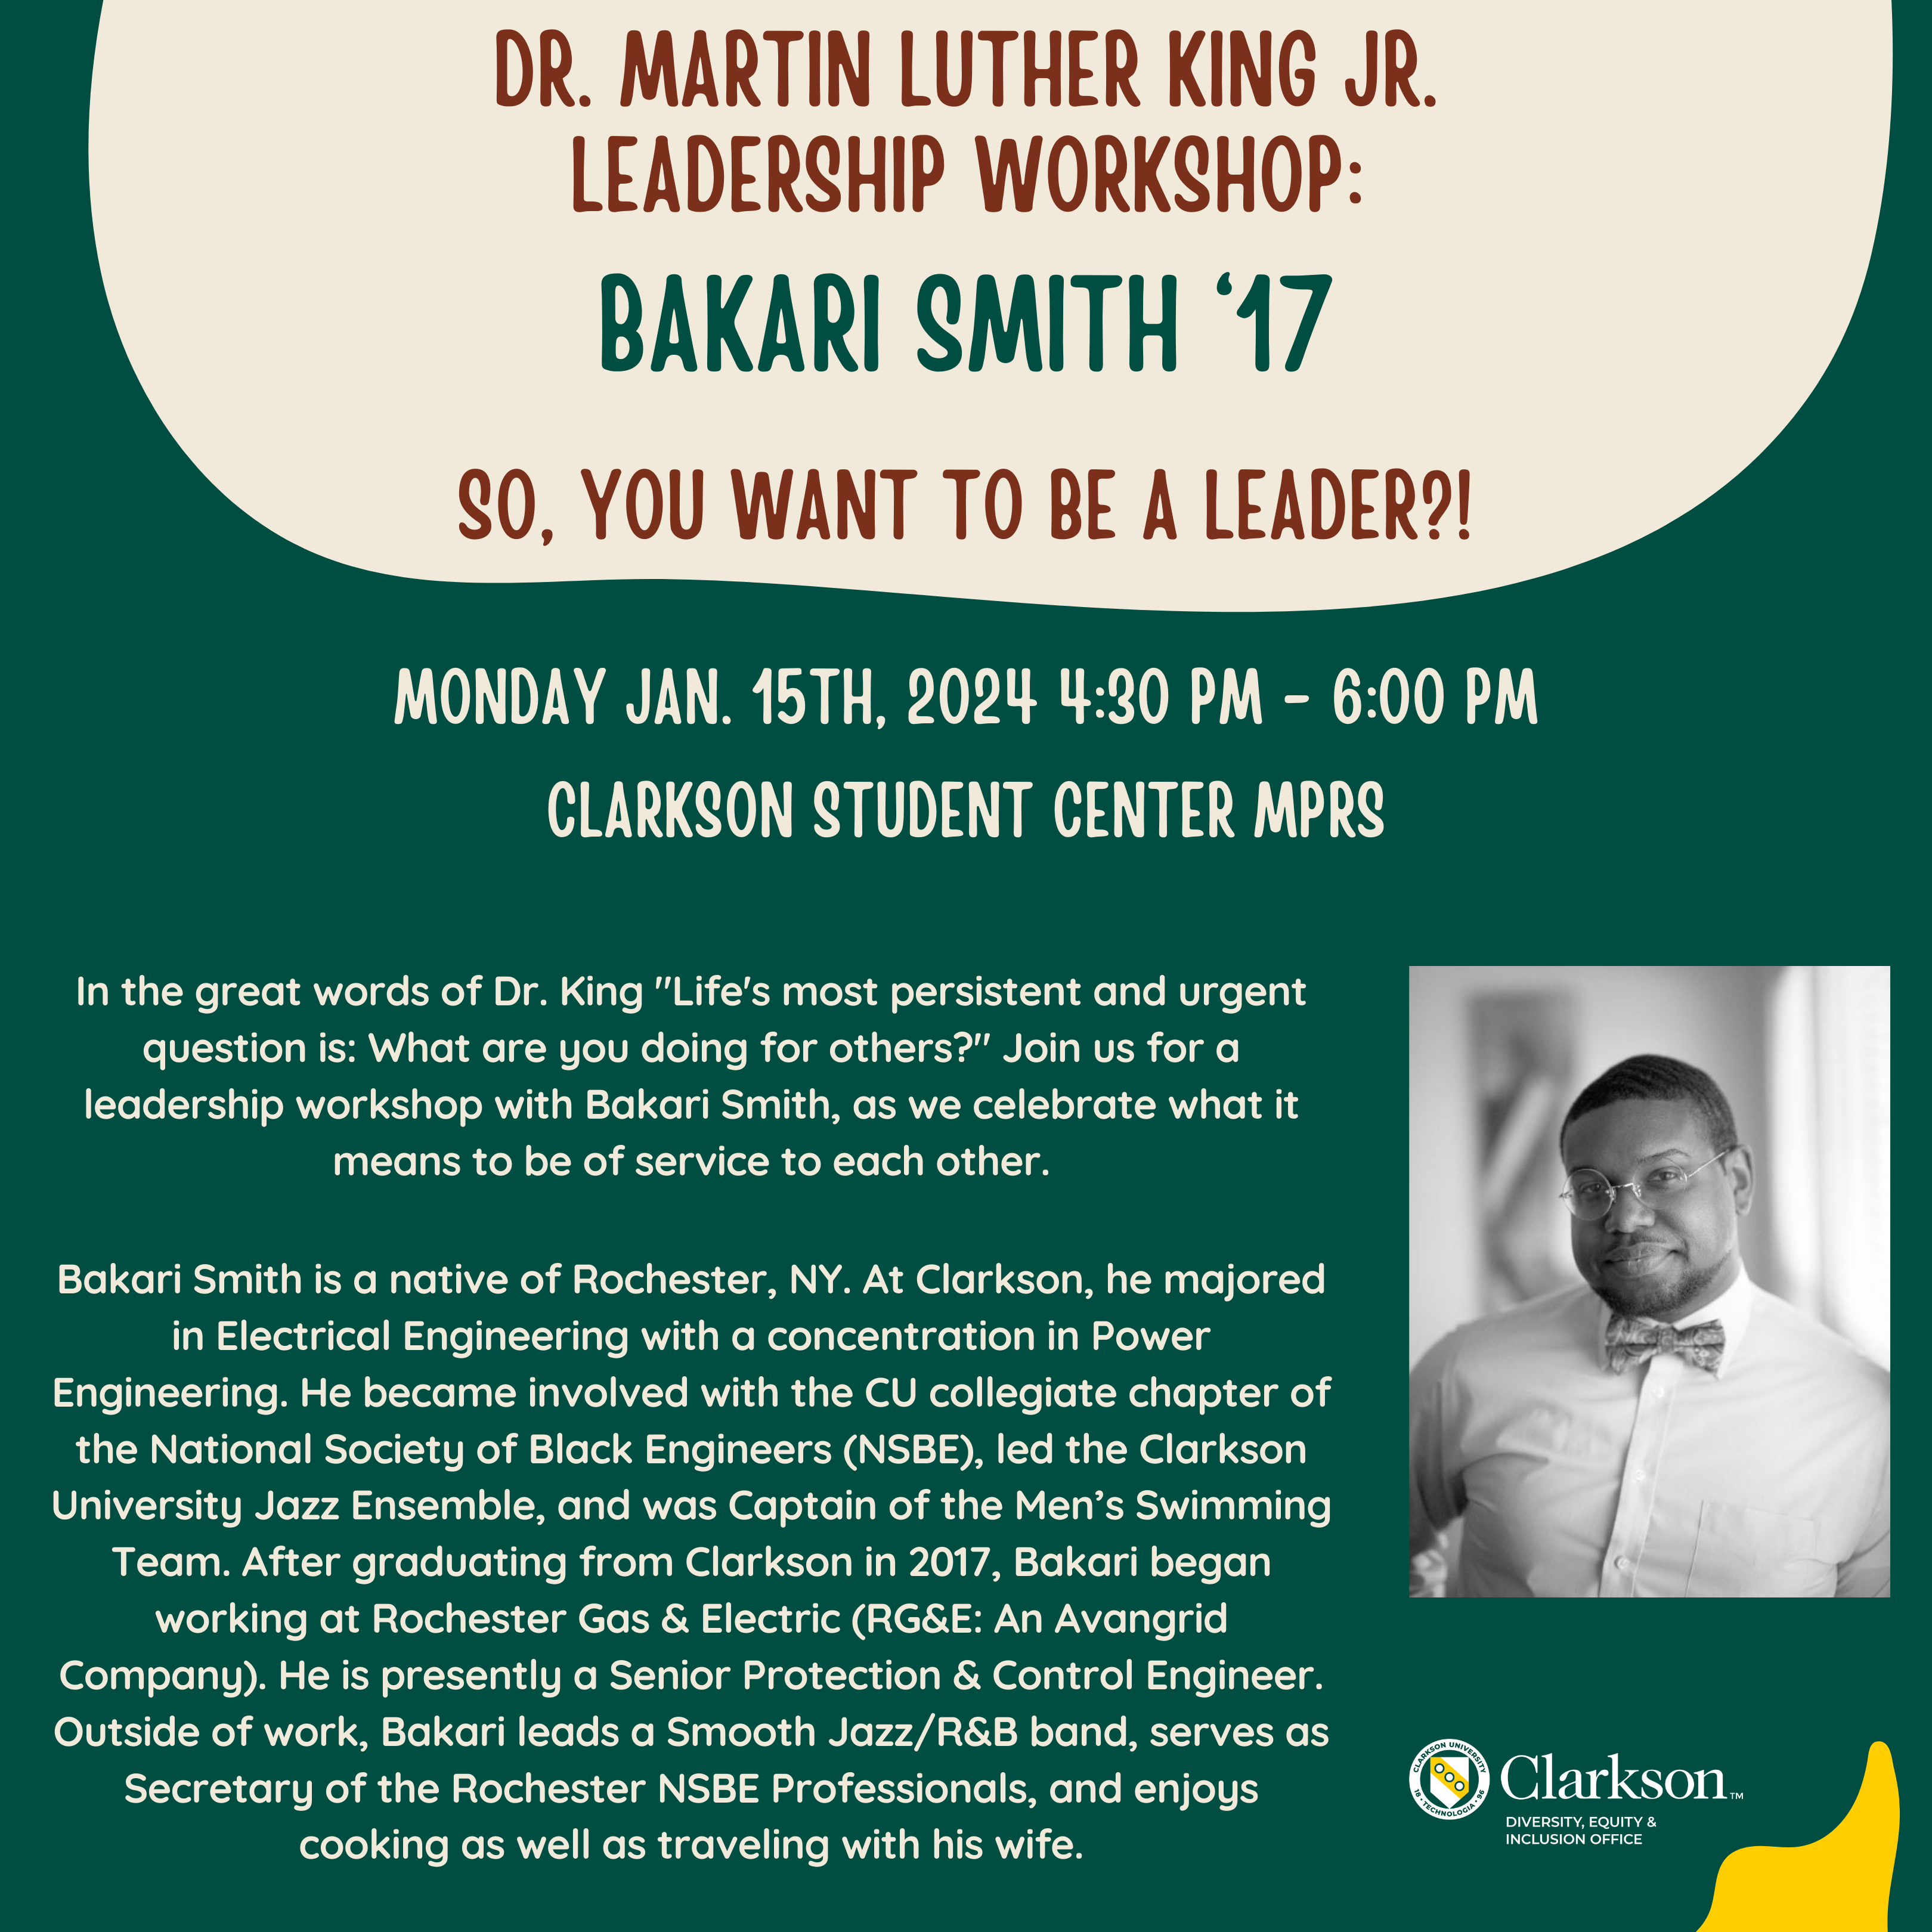 In the great words of Dr. King "Life's most persistent and urgent question is: What are you doing for others?" Join us for a leadership workshop with Bakari Smith, as we celebrate what it means to be of service to each other. Leadership Workshop: Dr. Martin Luther King JR. Leadership Workshop: Bakari Smith ‘17 "So, You Want To Be A Leader?!" Date: Monday, January. 15th, 2024 Time: 4:30 pm -6:00 pm Location: Student Center MPRs Biography: Bakari Smith is a native of Rochester, NY. At Clarkson, he majored in Electrical Engineering with a concentration in Power Engineering. He became involved with the CU collegiate chapter of the National Society of Black Engineers (NSBE), led the Clarkson University Jazz Ensemble, and was Captain of the Men’s Swimming Team. After graduating from Clarkson in 2017, Bakari began working at Rochester Gas & Electric (RG&E: An Avangrid Company). He is presently a Senior Protection & Control Engineer. Outside of work, Bakari leads a Smooth Jazz/R&B band, serves as Secretary of the Rochester NSBE Professionals, and enjoys cooking as well as traveling with his wife. If you have any questions, please contact us via email at: diversity@clarkson.edu